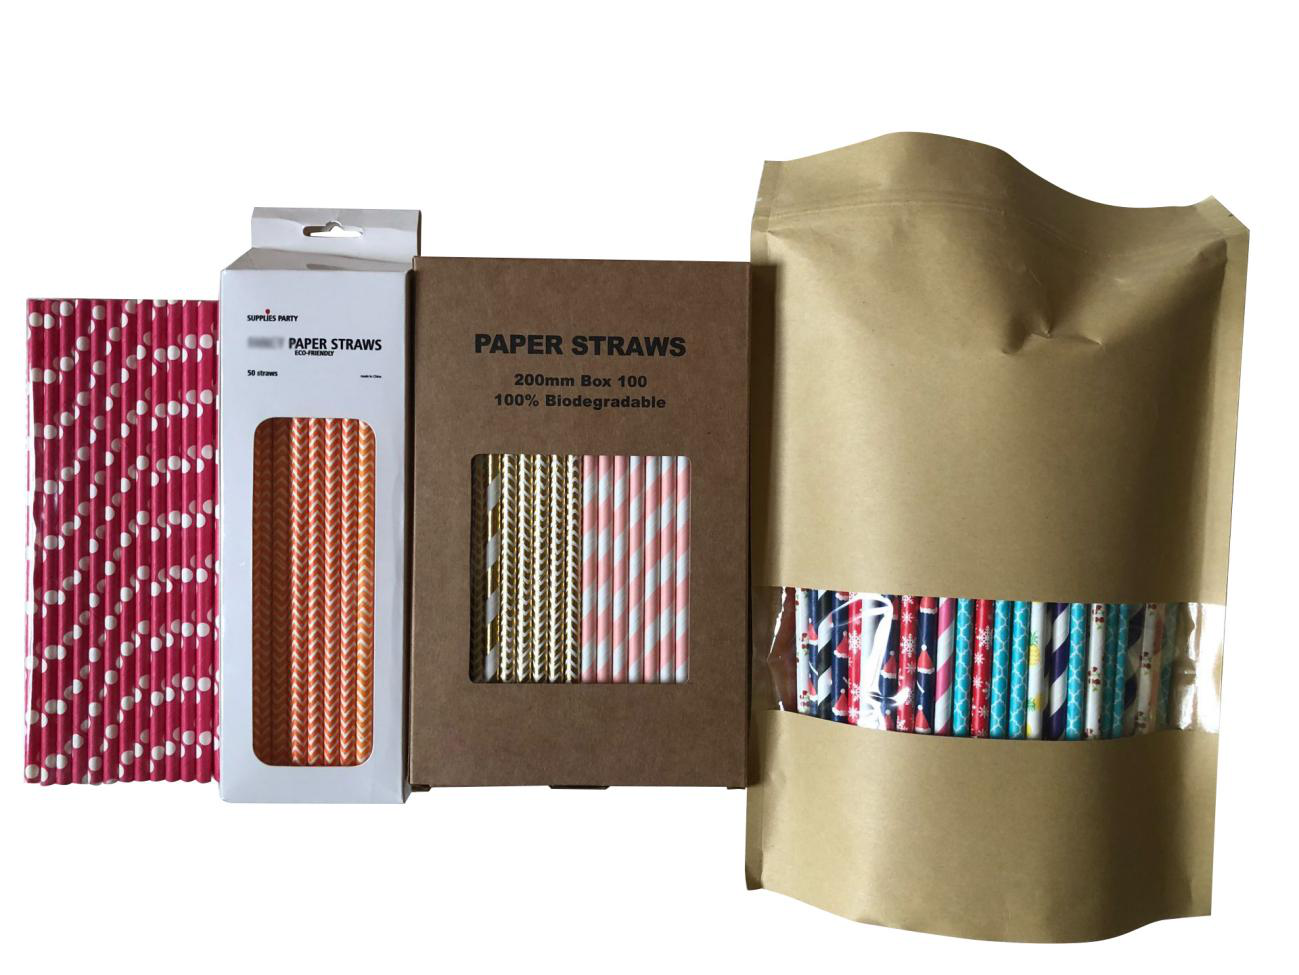 The package of 6mm Degradable pink chevron striped Paper Straw